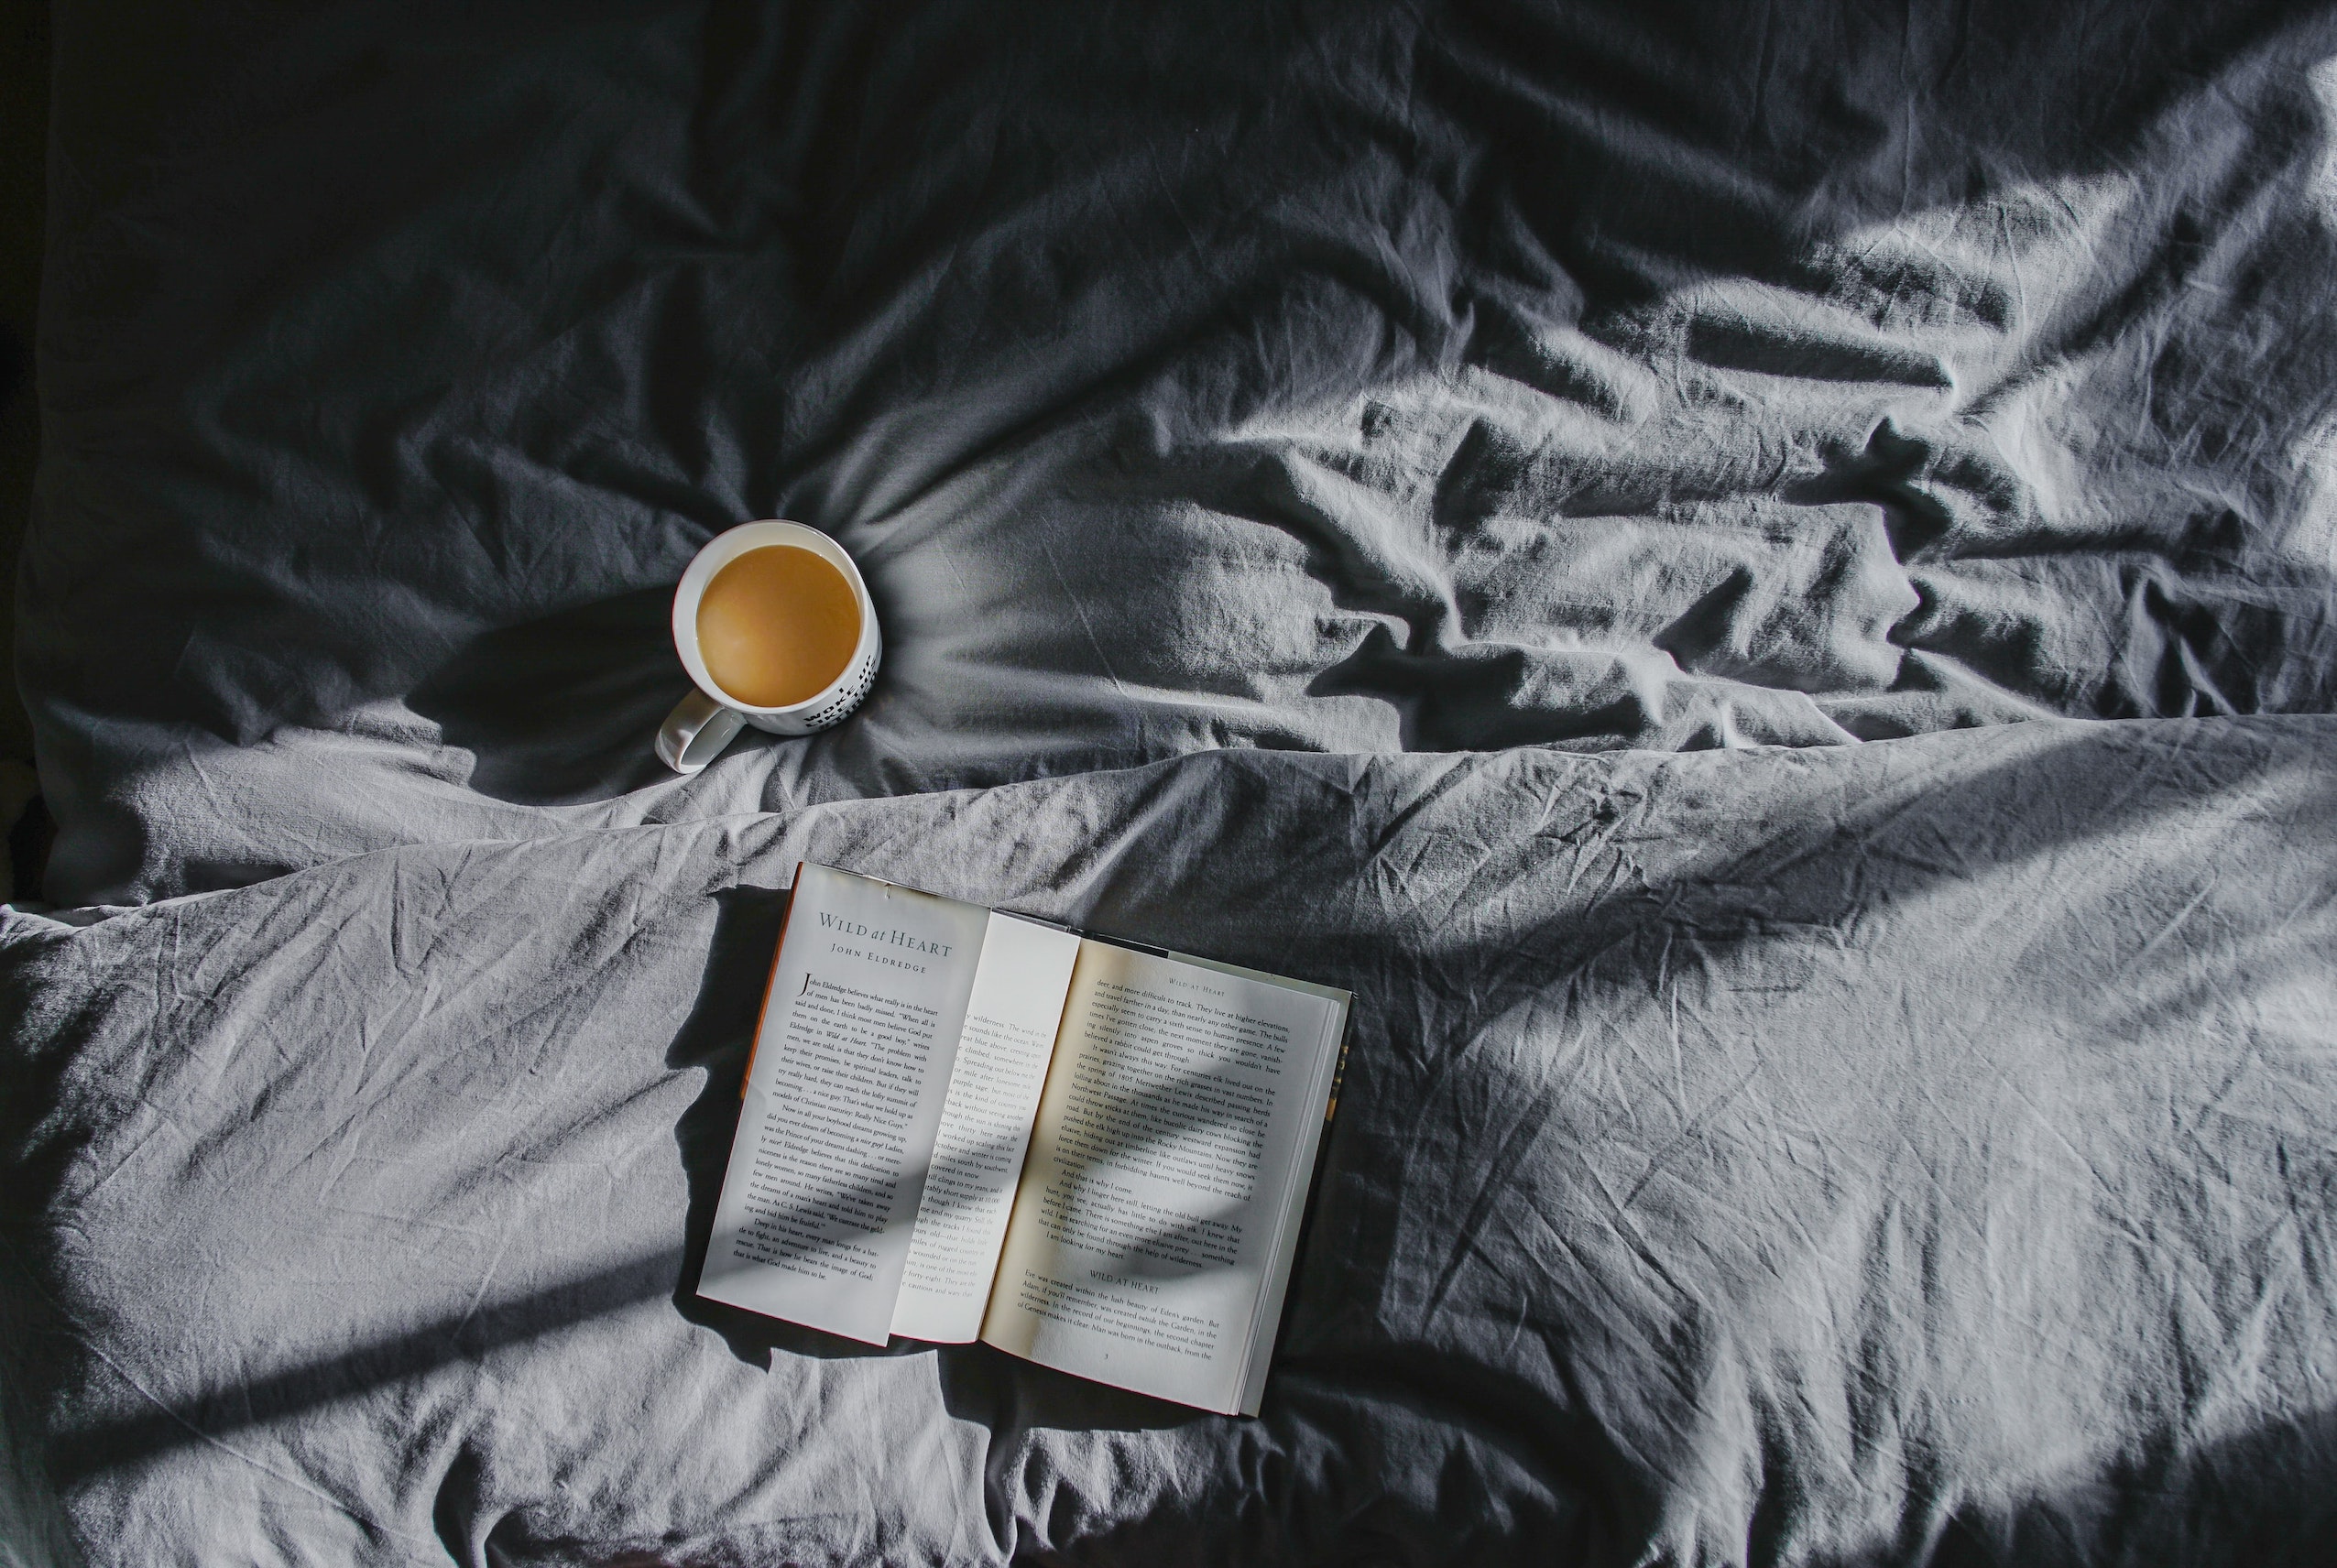 open book and mug on grey bed sheets